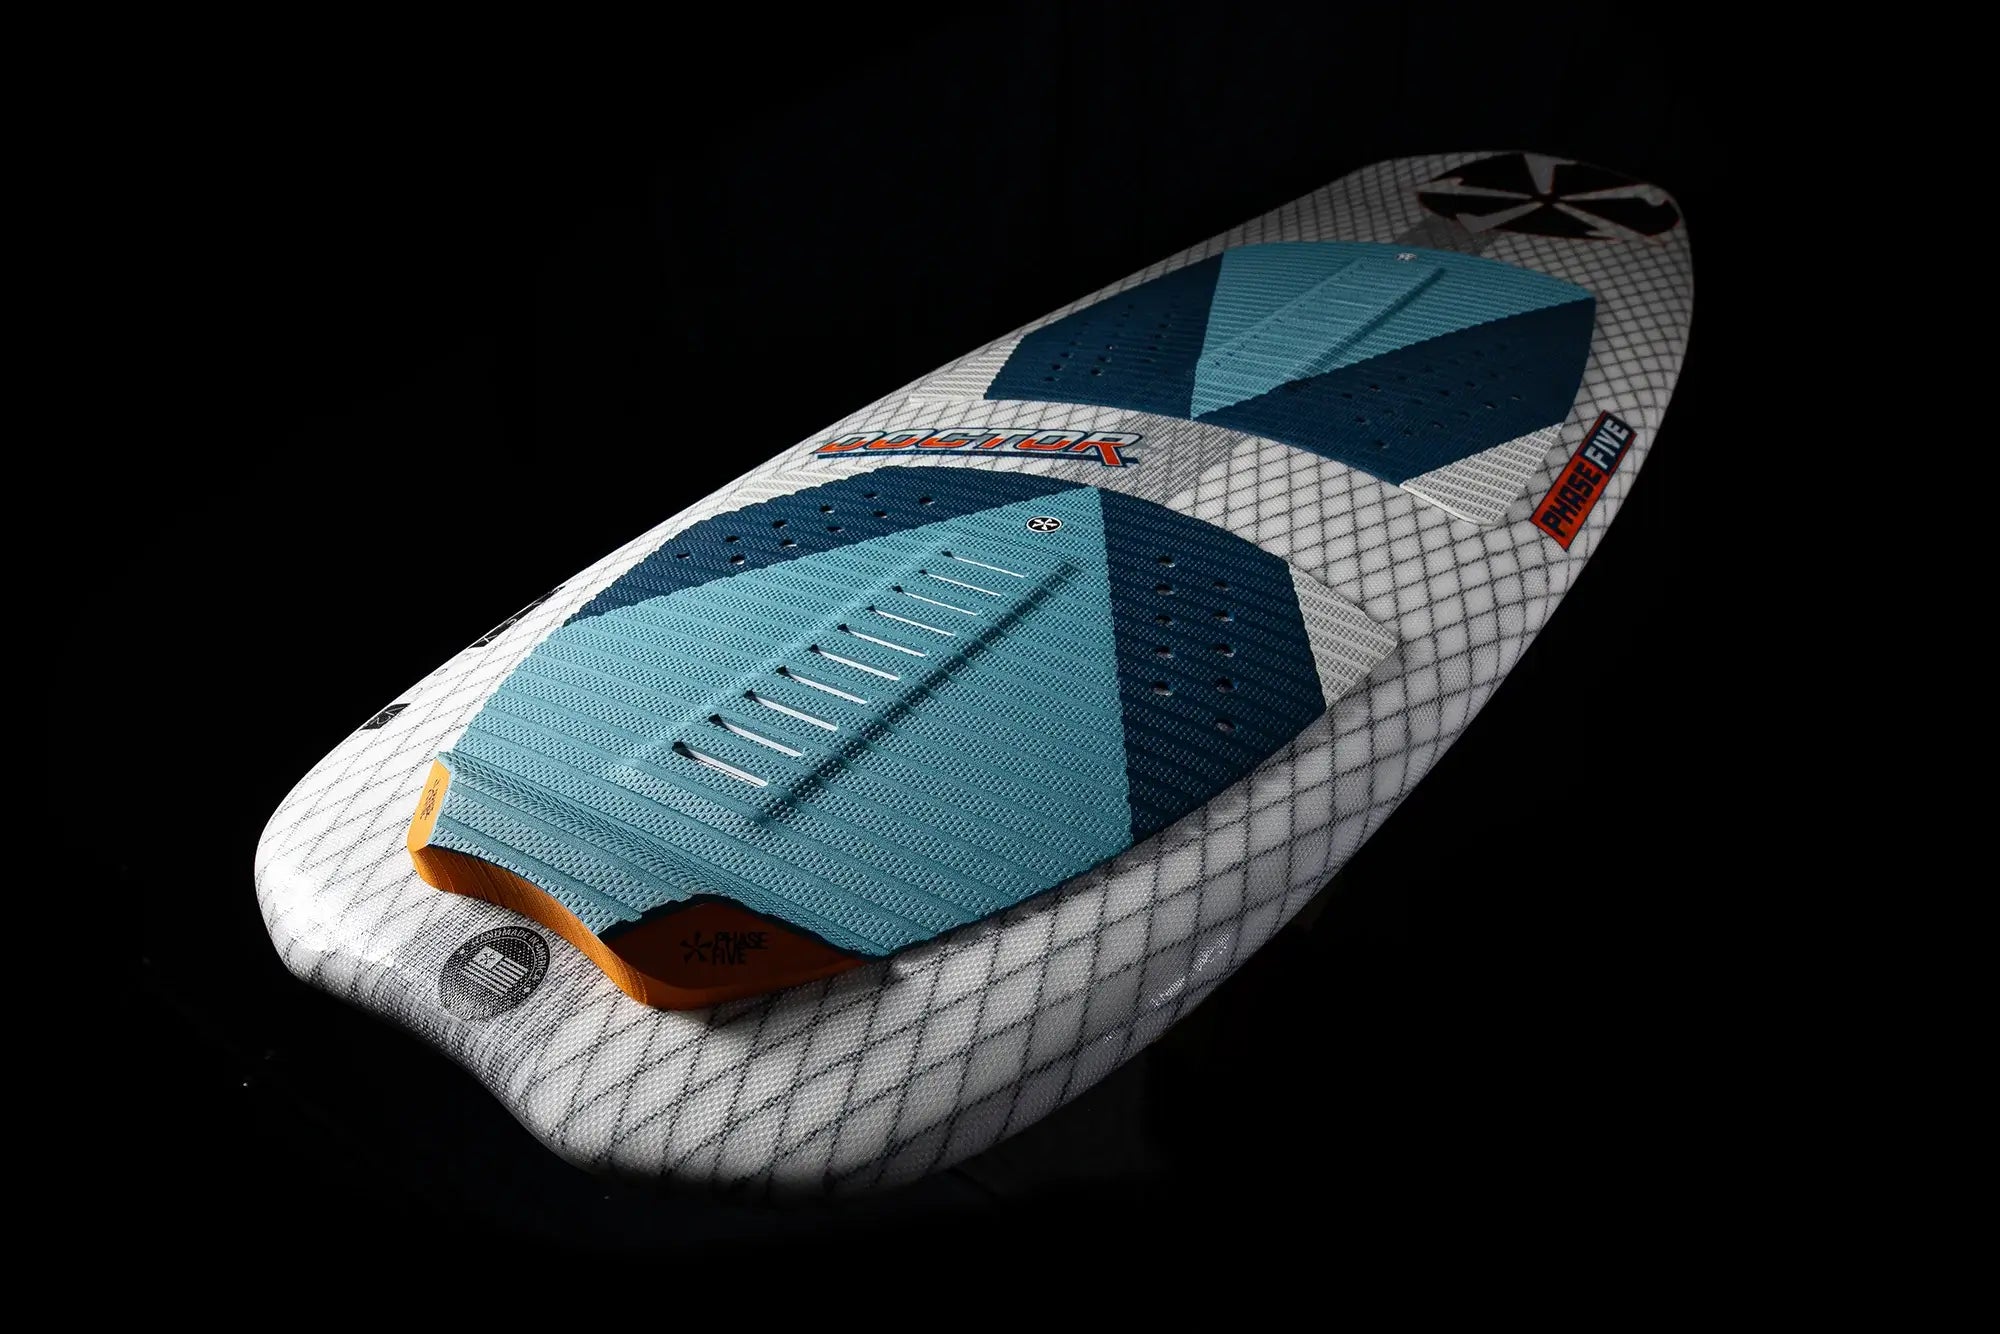 A Phase 5 2024 Doctor Wakesurf Board, designed for experienced riders, showcasing stability and board control, set against a sleek black background.